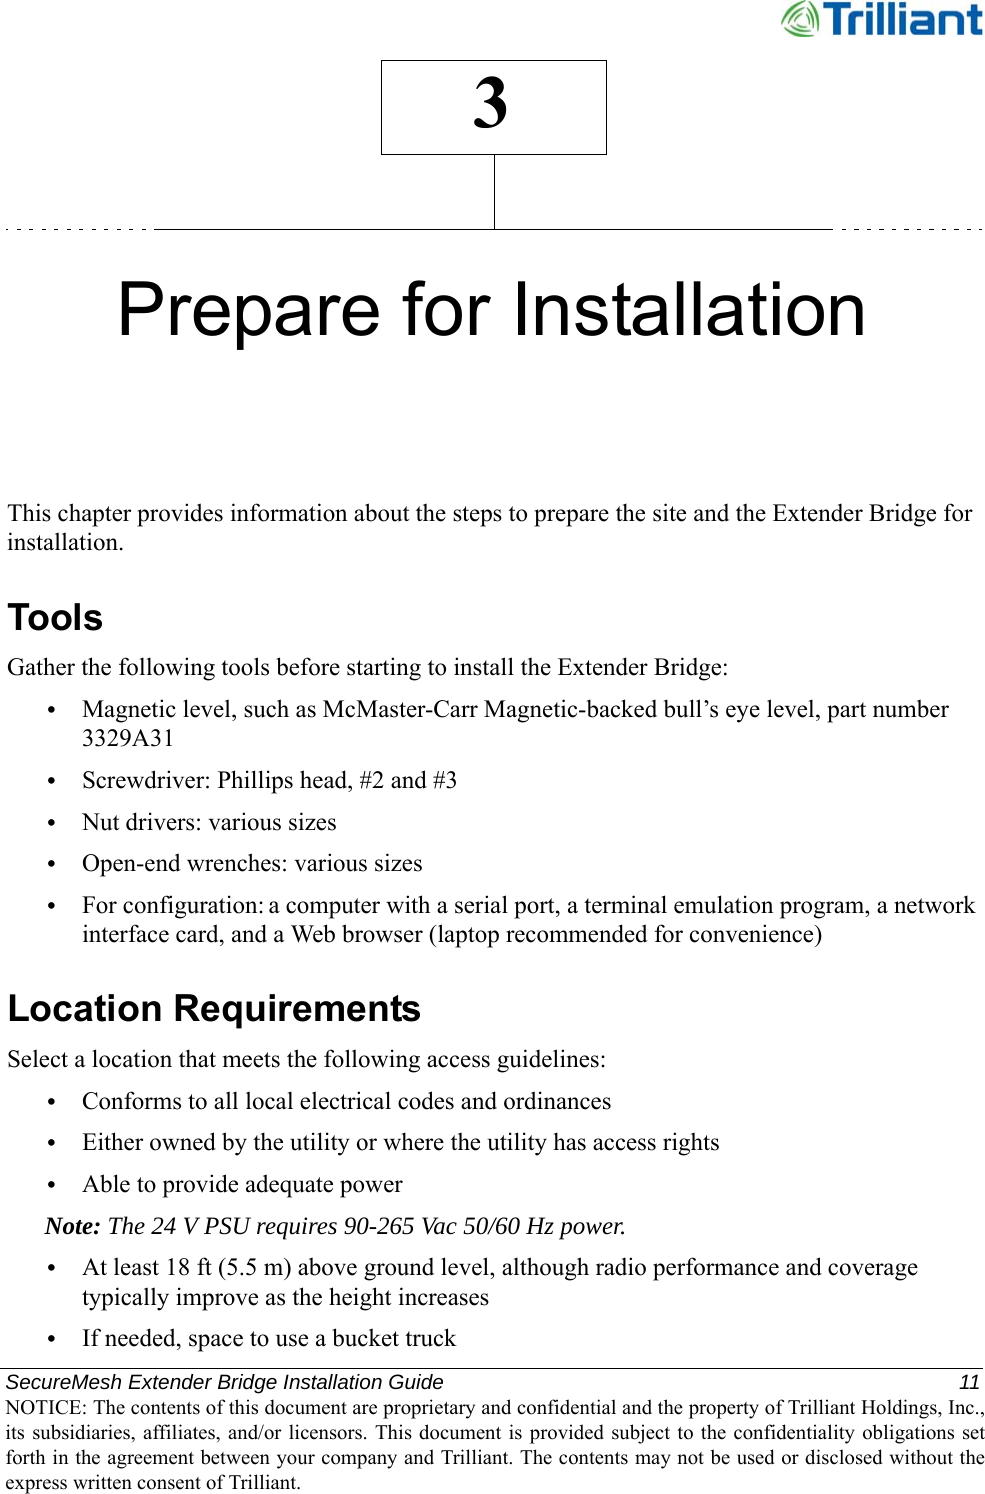 SecureMesh Extender Bridge Installation Guide  11NOTICE: The contents of this document are proprietary and confidential and the property of Trilliant Holdings, Inc.,its subsidiaries, affiliates, and/or licensors. This document  is  provided subject  to  the  confidentiality obligations setforth in the agreement between your company and Trilliant. The contents may not be used or disclosed without theexpress written consent of Trilliant.3Prepare for InstallationThis chapter provides information about the steps to prepare the site and the Extender Bridge for installation.ToolsGather the following tools before starting to install the Extender Bridge:•Magnetic level, such as McMaster-Carr Magnetic-backed bull’s eye level, part number 3329A31•Screwdriver: Phillips head, #2 and #3•Nut drivers: various sizes•Open-end wrenches: various sizes•For configuration: a computer with a serial port, a terminal emulation program, a network interface card, and a Web browser (laptop recommended for convenience)Location RequirementsSelect a location that meets the following access guidelines:•Conforms to all local electrical codes and ordinances•Either owned by the utility or where the utility has access rights•Able to provide adequate powerNote: The 24 V PSU requires 90-265 Vac 50/60 Hz power.•At least 18 ft (5.5 m) above ground level, although radio performance and coverage typically improve as the height increases•If needed, space to use a bucket truck